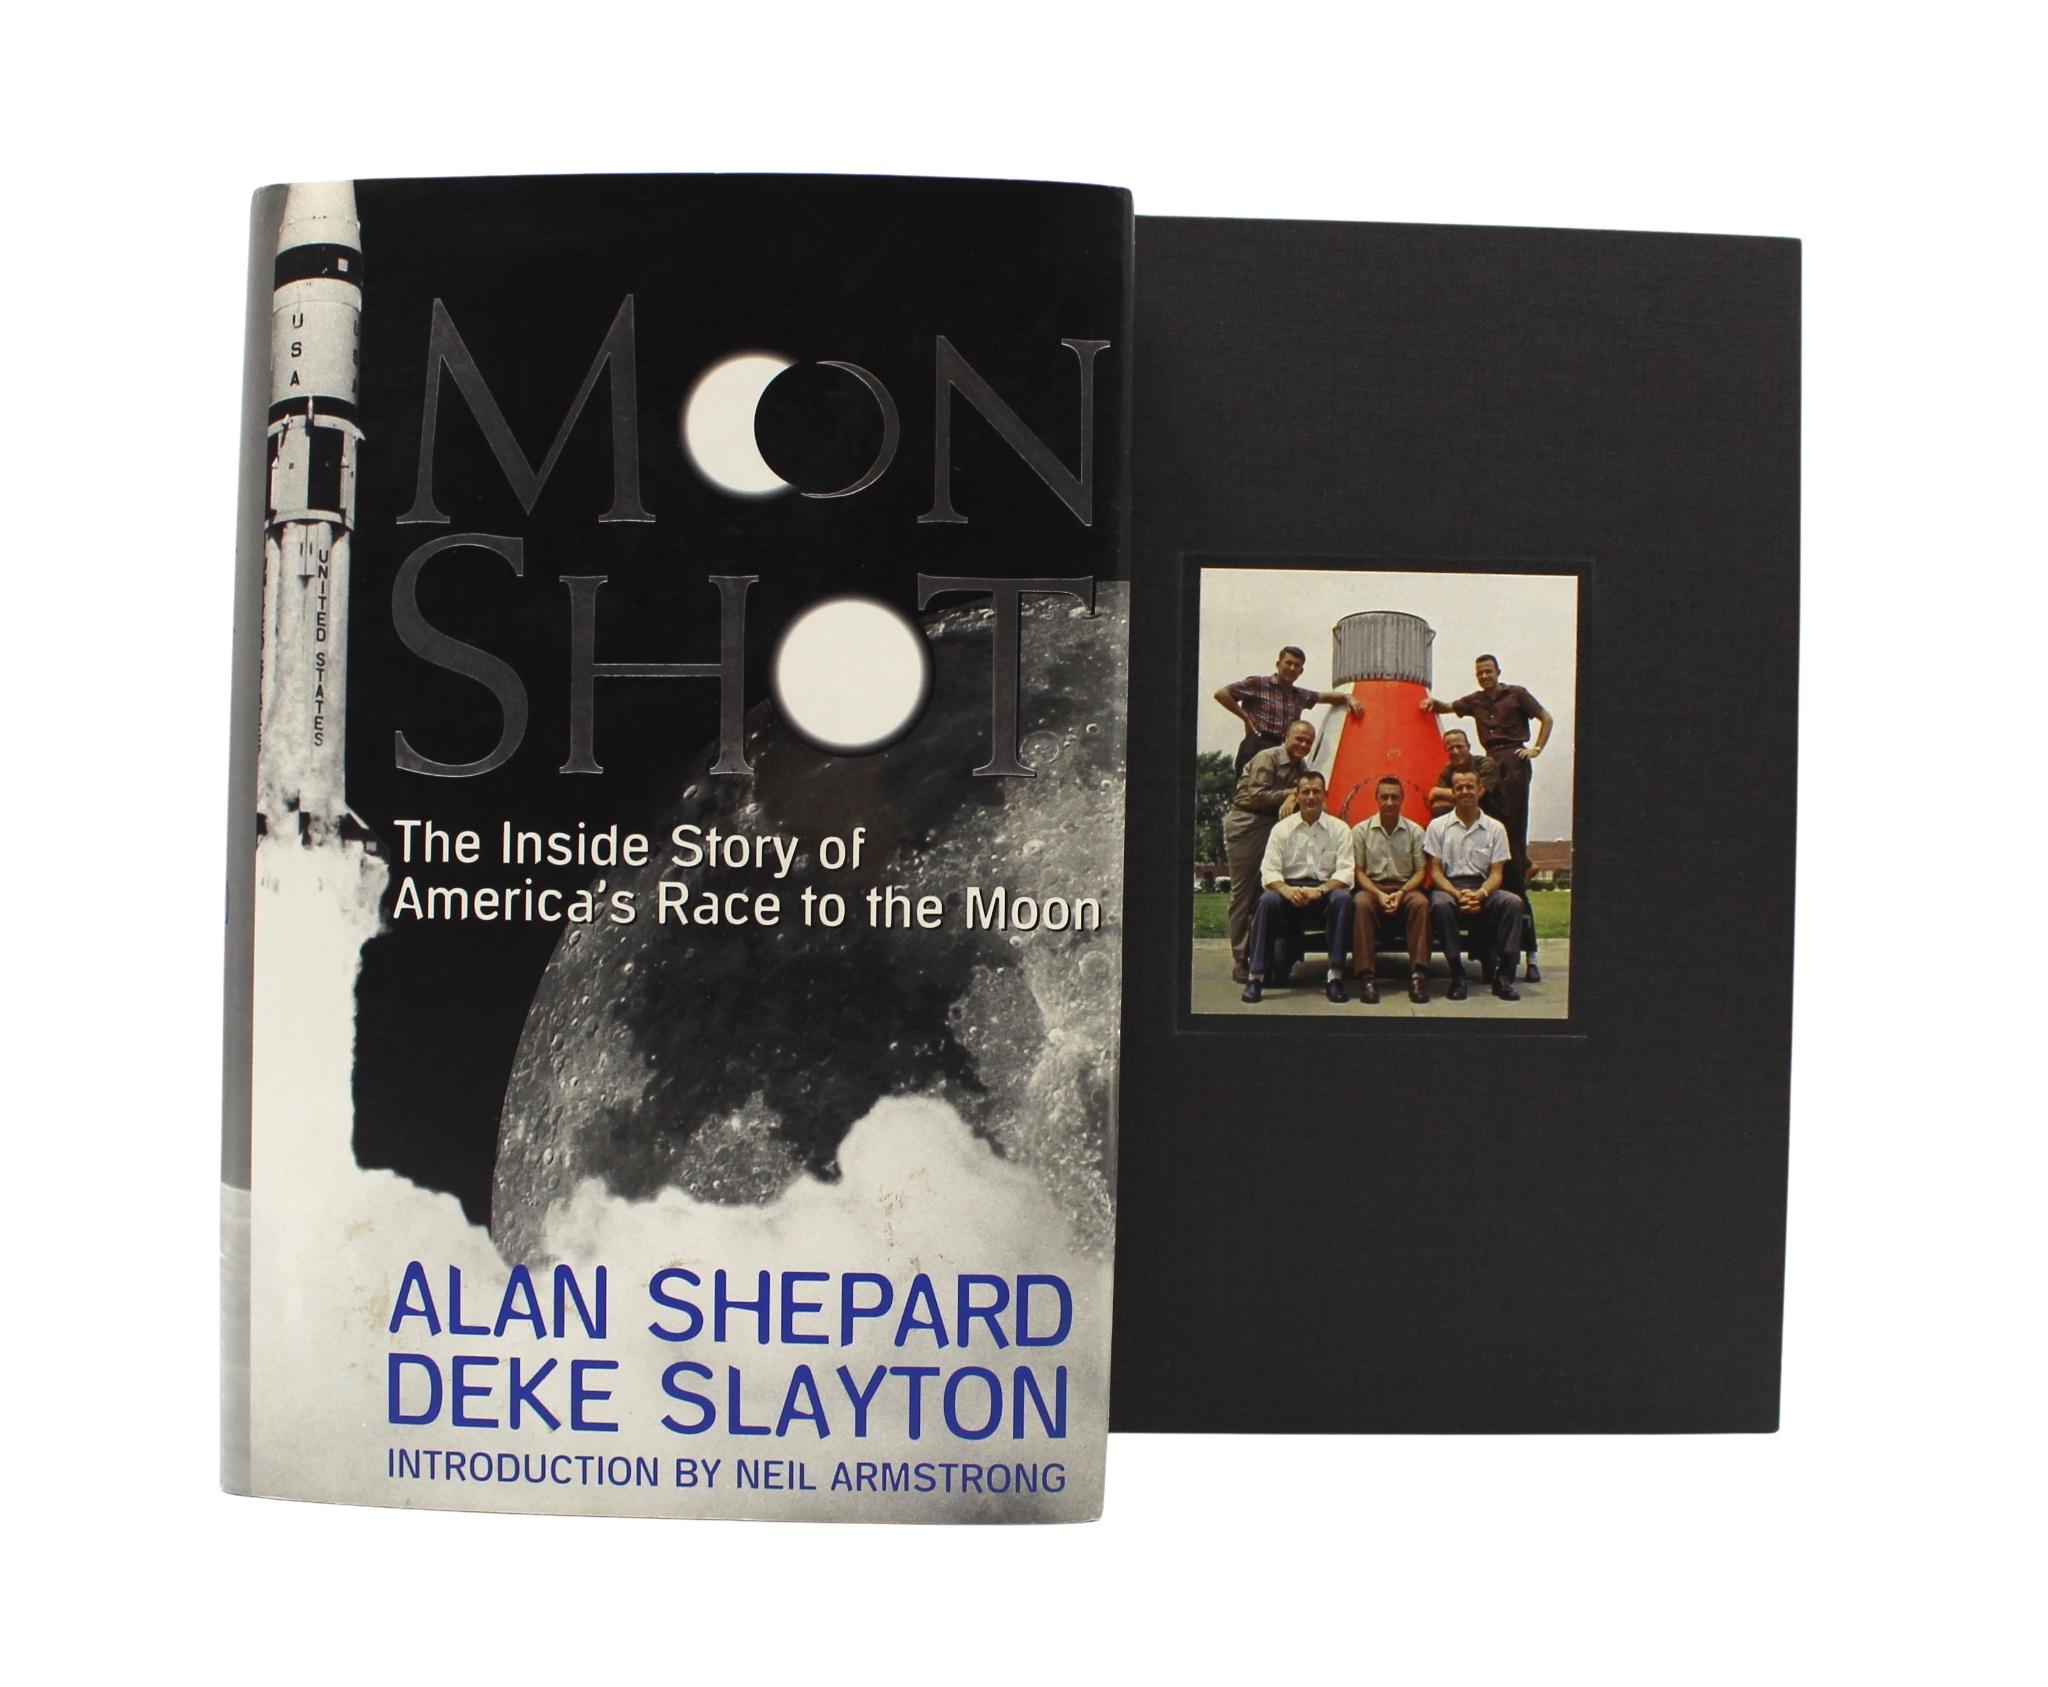 American Moon Shot, By Alan Shepard and Deke Slayton, Signed by Shepard, First Edition For Sale